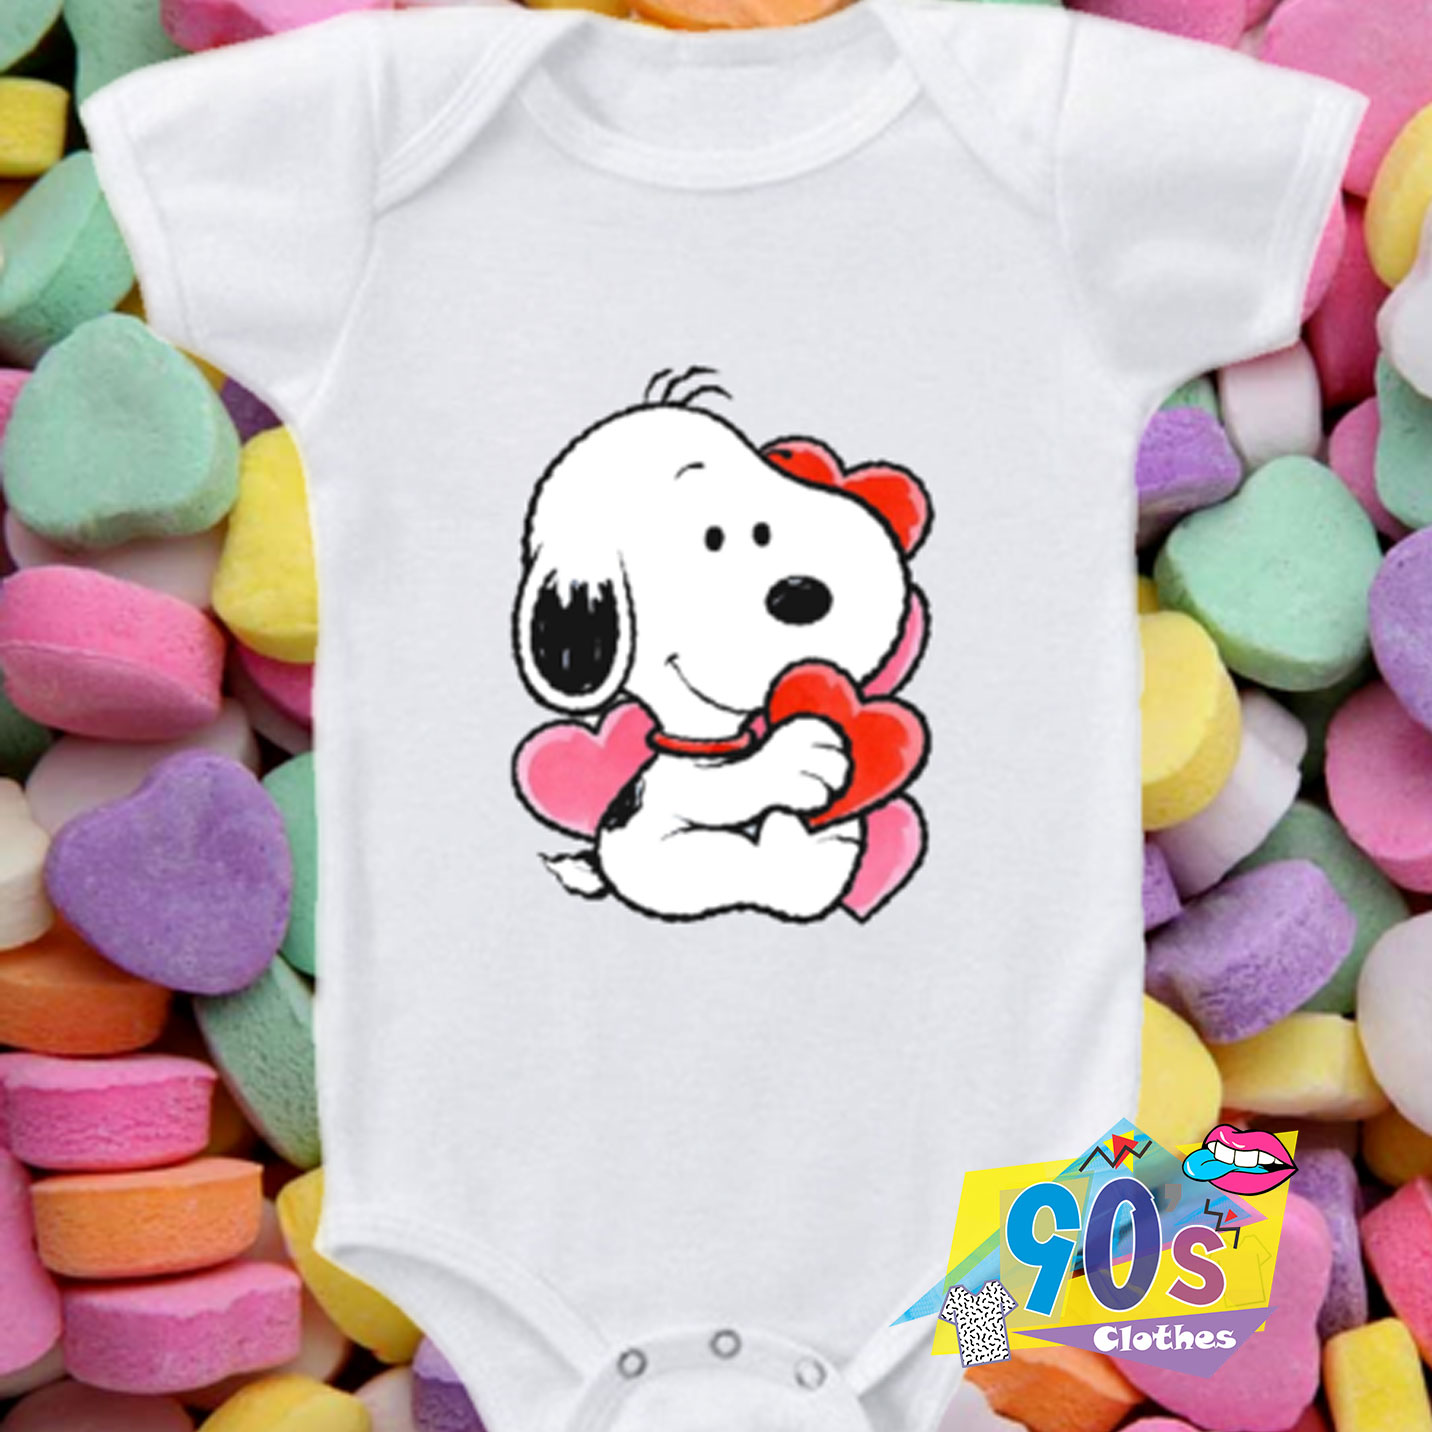 Download Cute Baby Snoopy Baby Onesie On Sale - 90sclothes.com